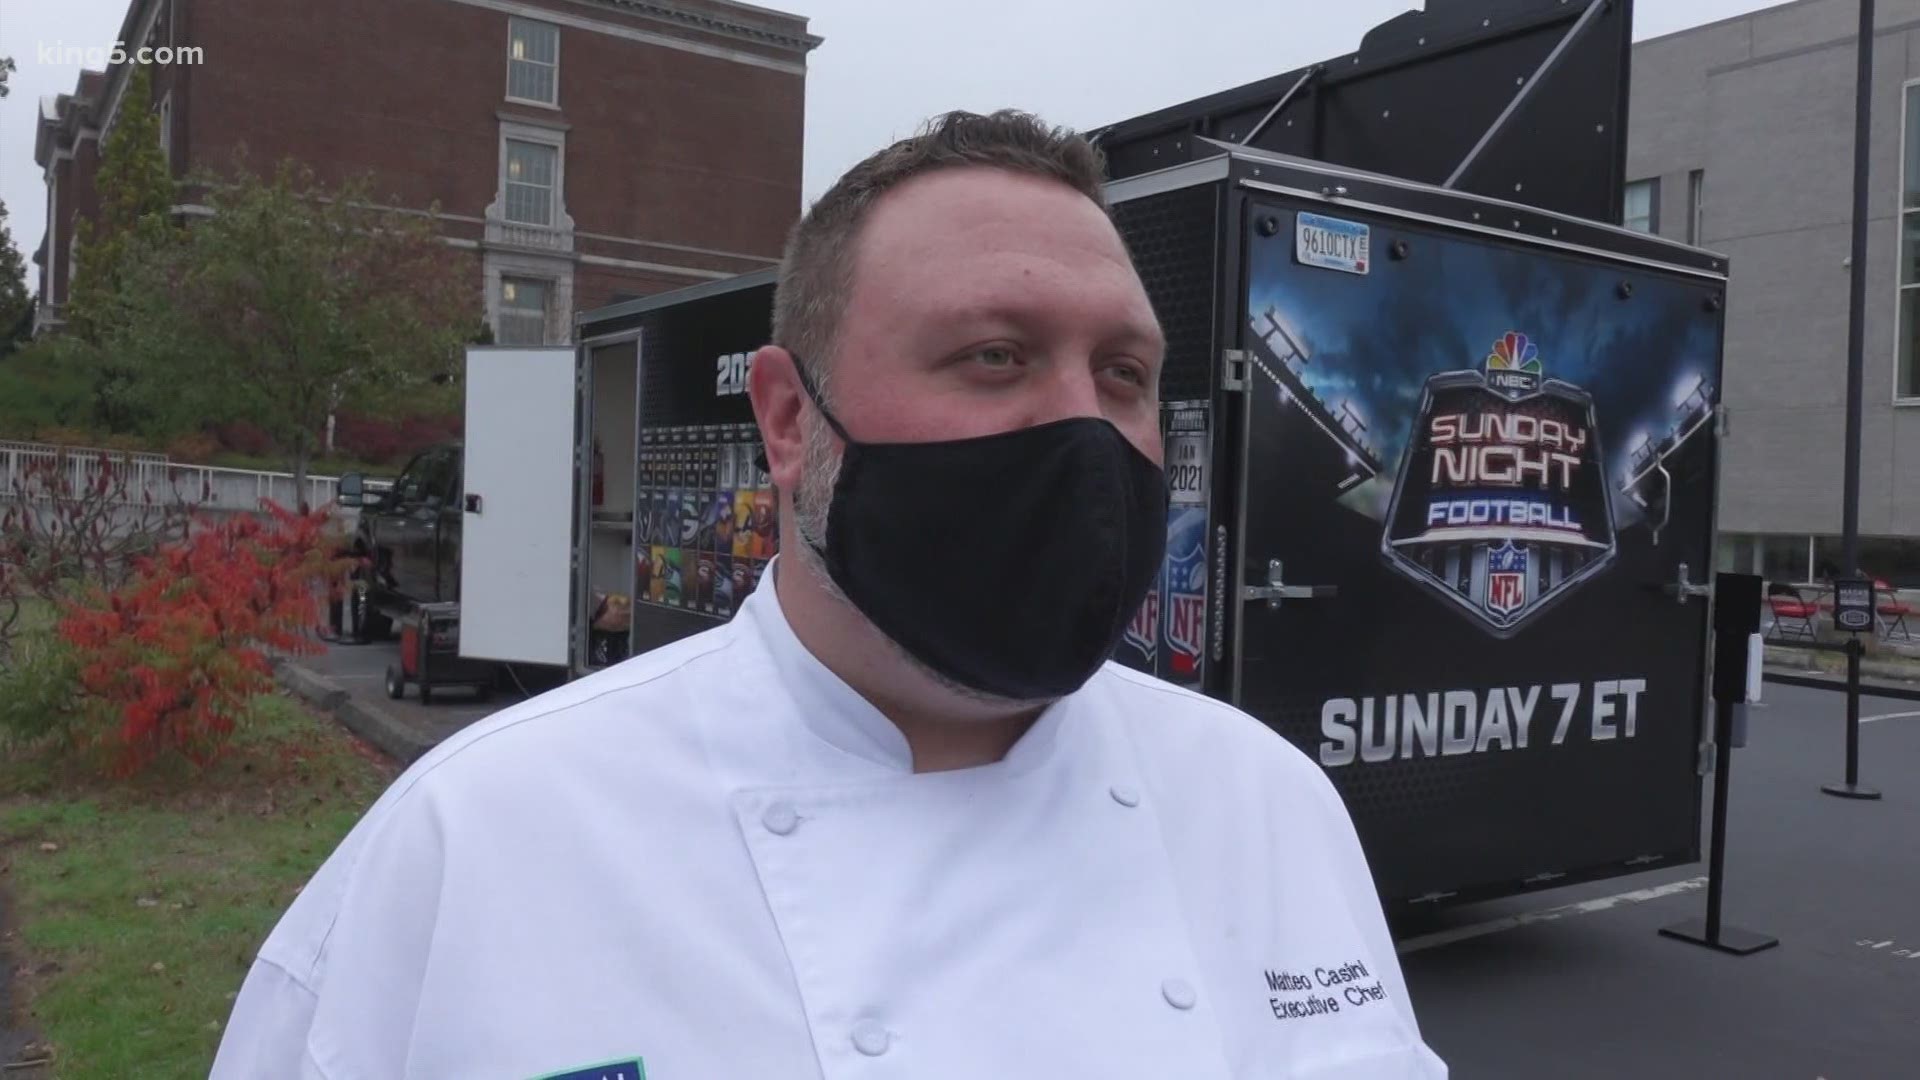 The Sunday Night Football Grill is back in Seattle this week, this time feeding teachers at Cleveland High School.